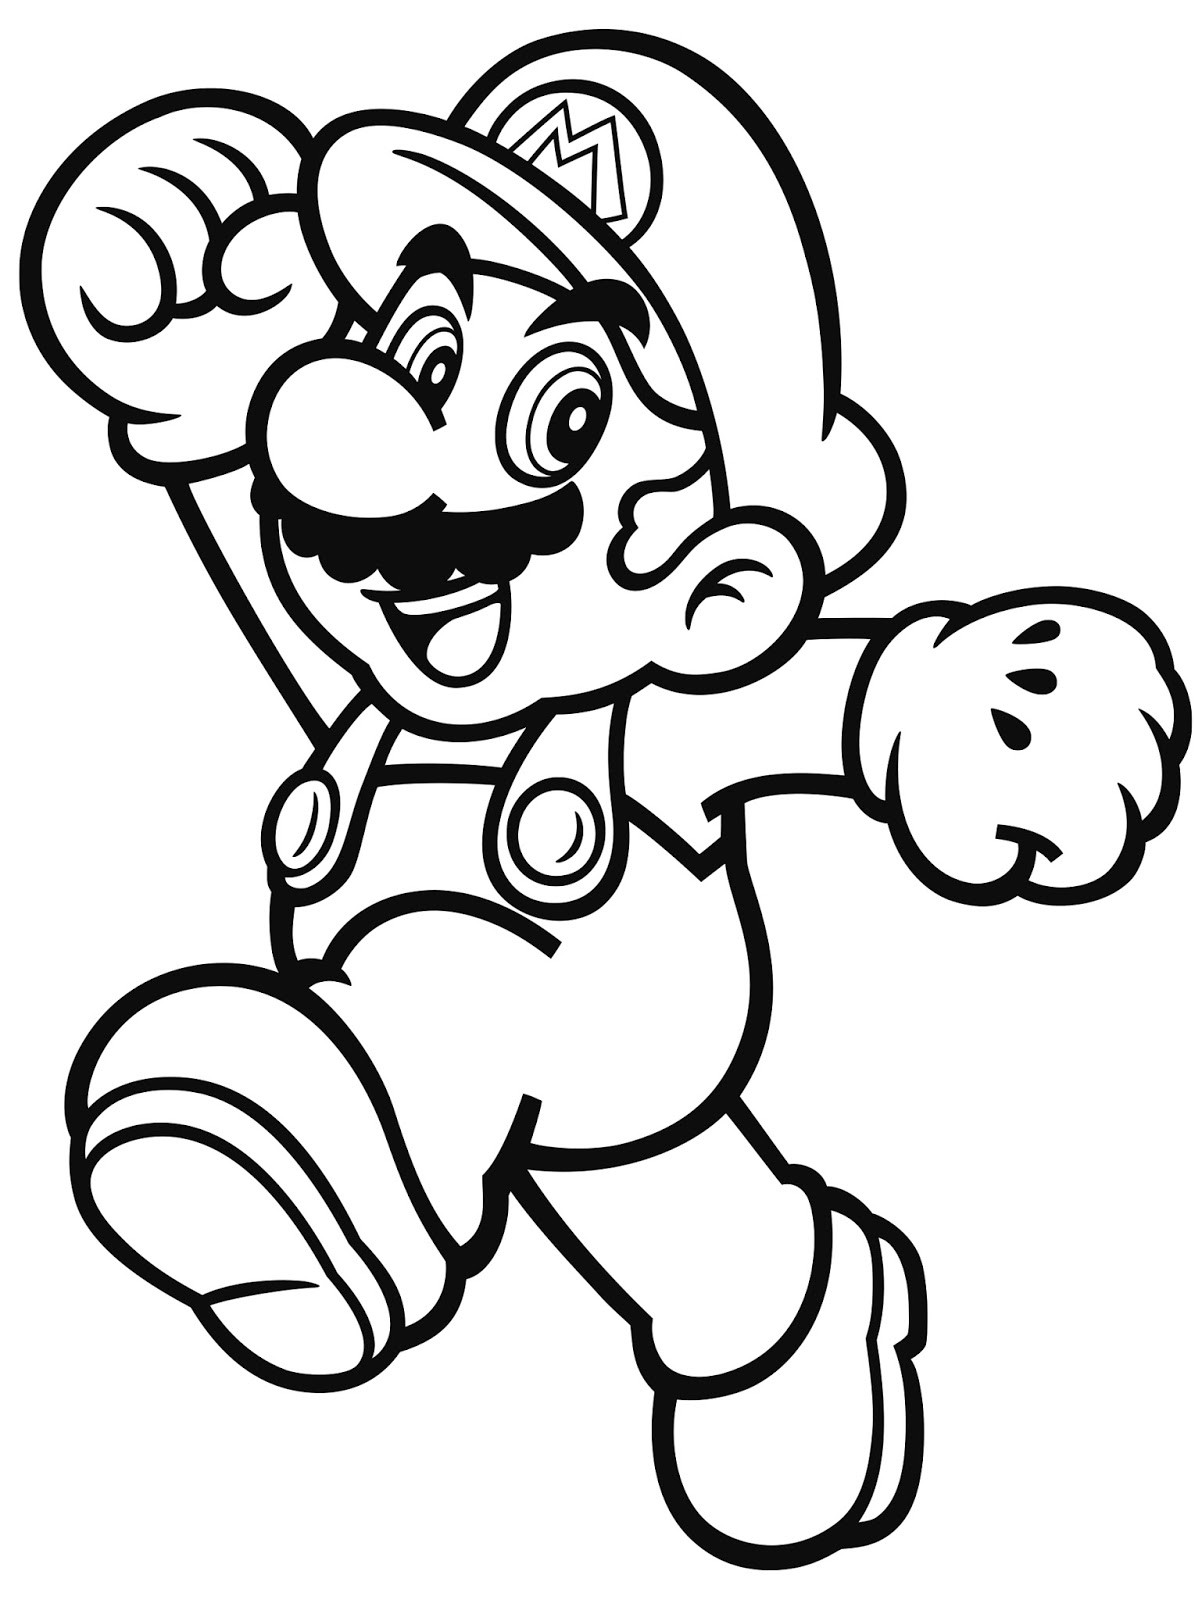 Super Mario Coloring Book
 Nintendo launches coloring pages with characters Mario